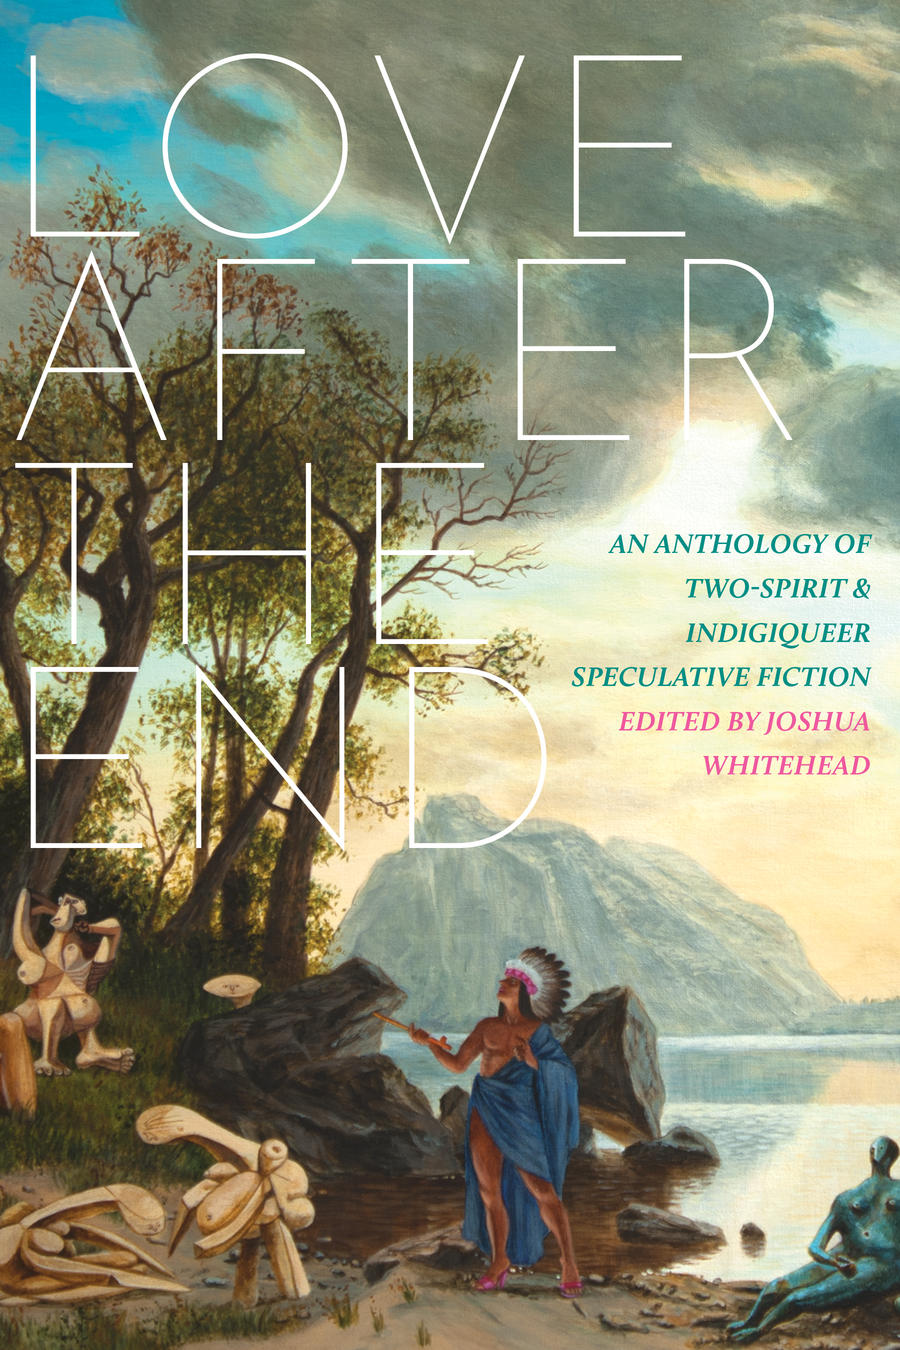 Image Love after the end : an anthology of two-spirit & indigiqueer speculative fiction